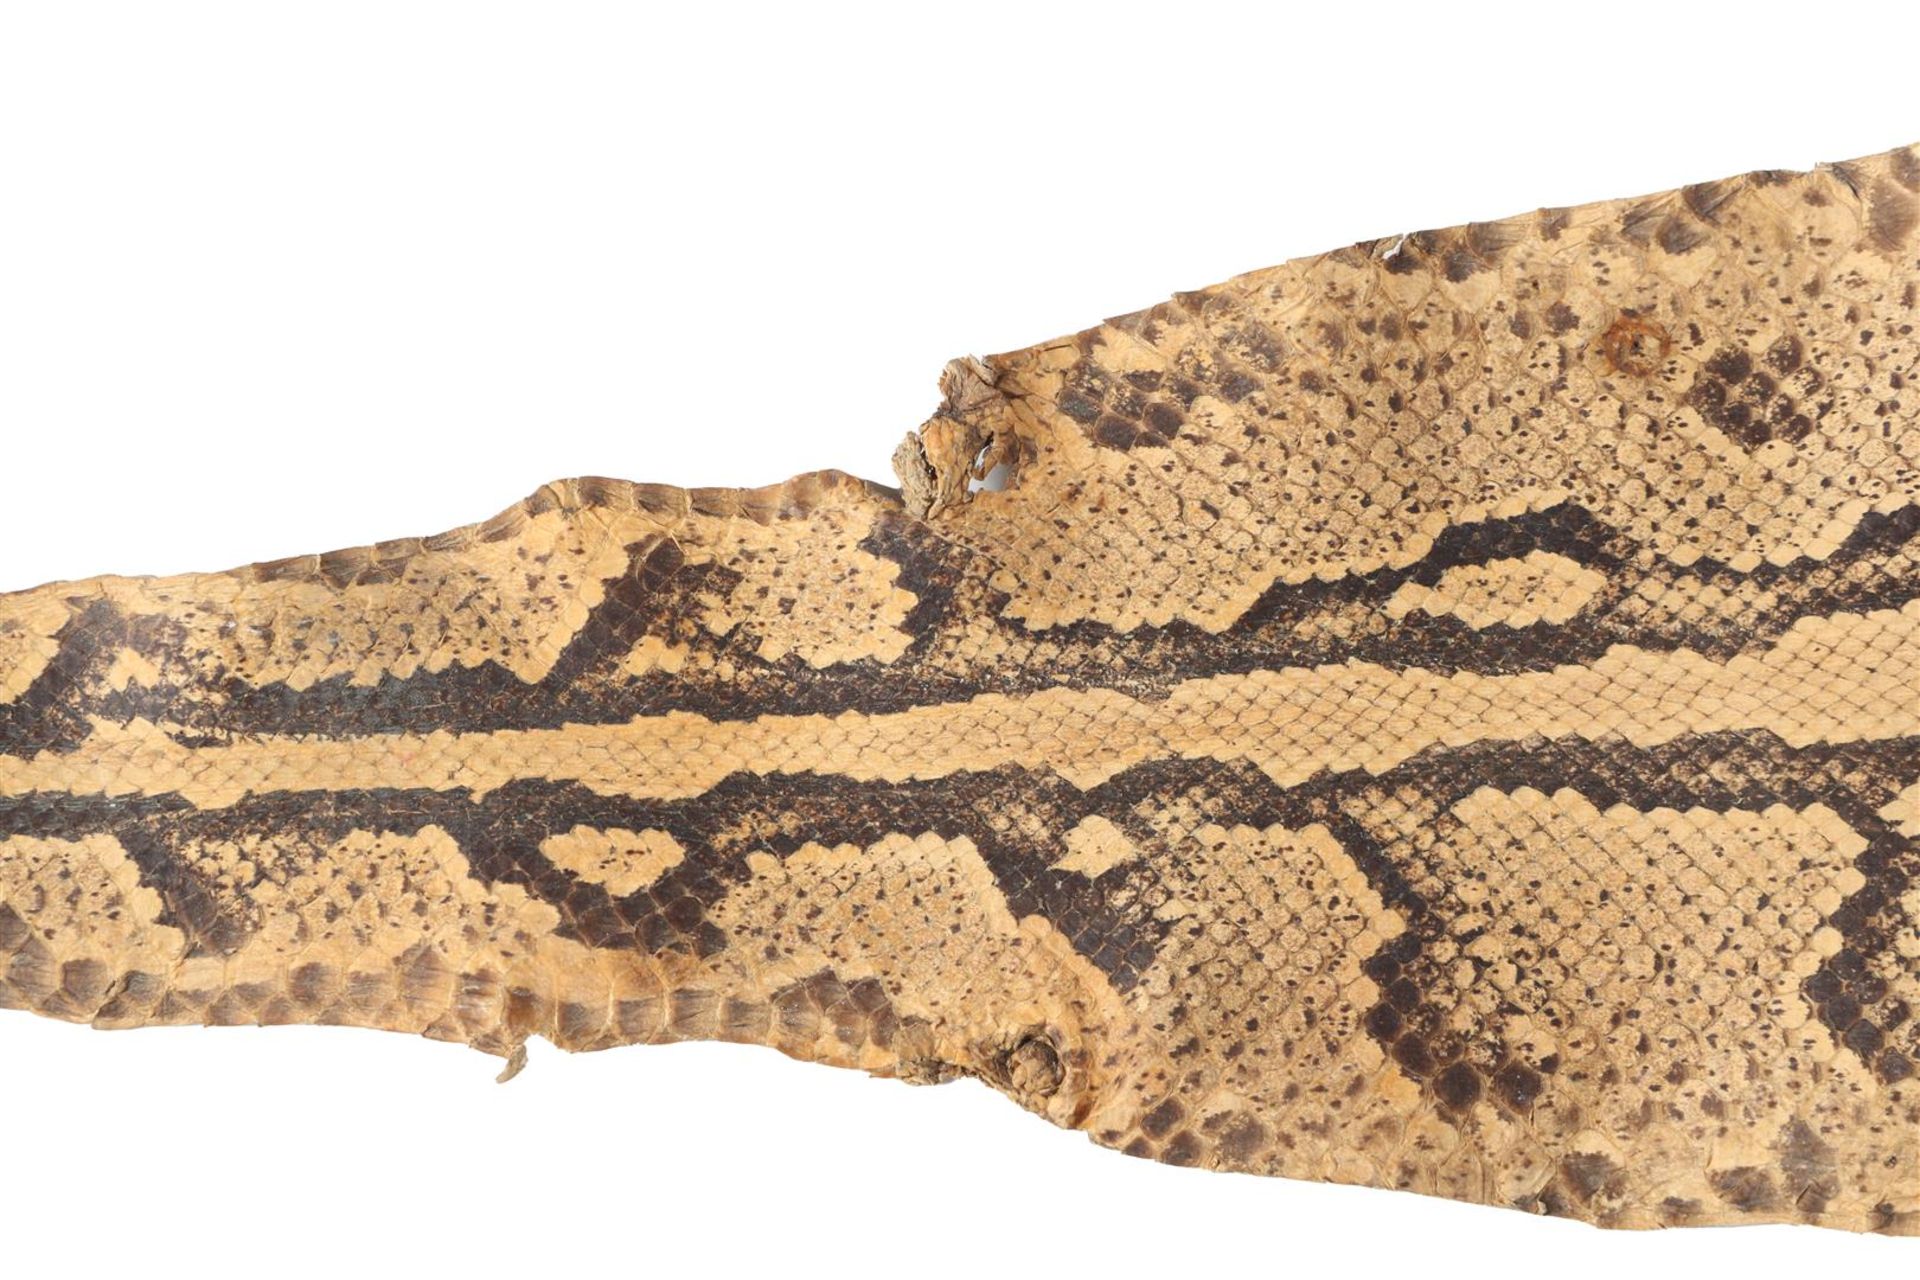 Skin of a python - Image 6 of 8